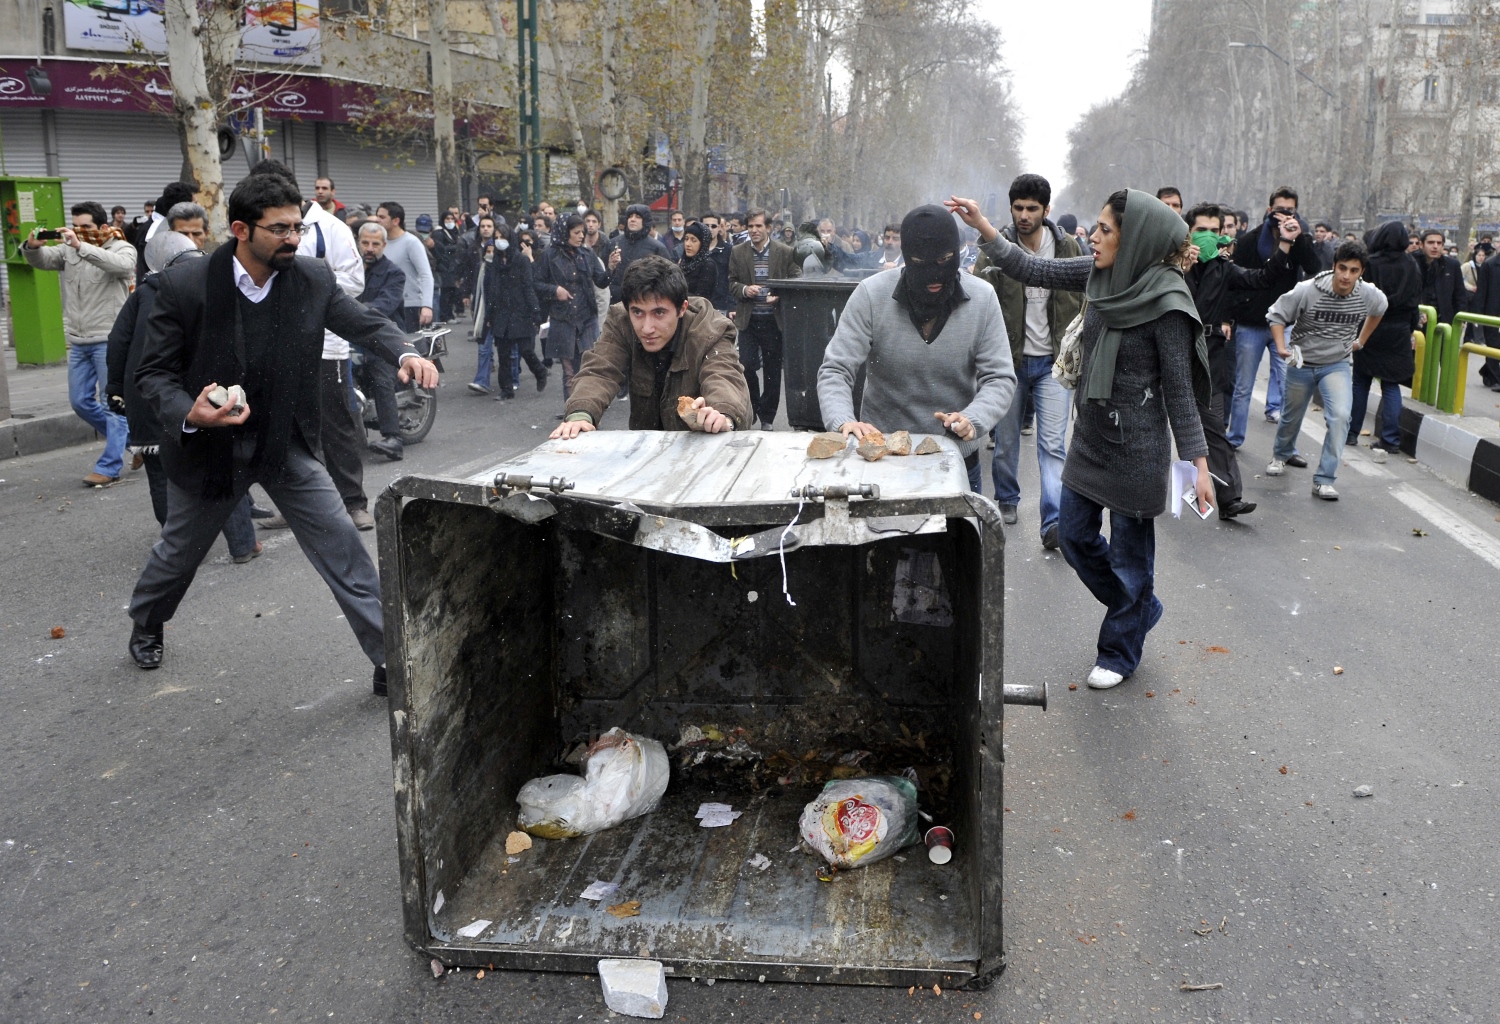 Iranian opposition supporters push a garbage container during clashes with security forces in Tehran on December 27, 2009 (AFP)